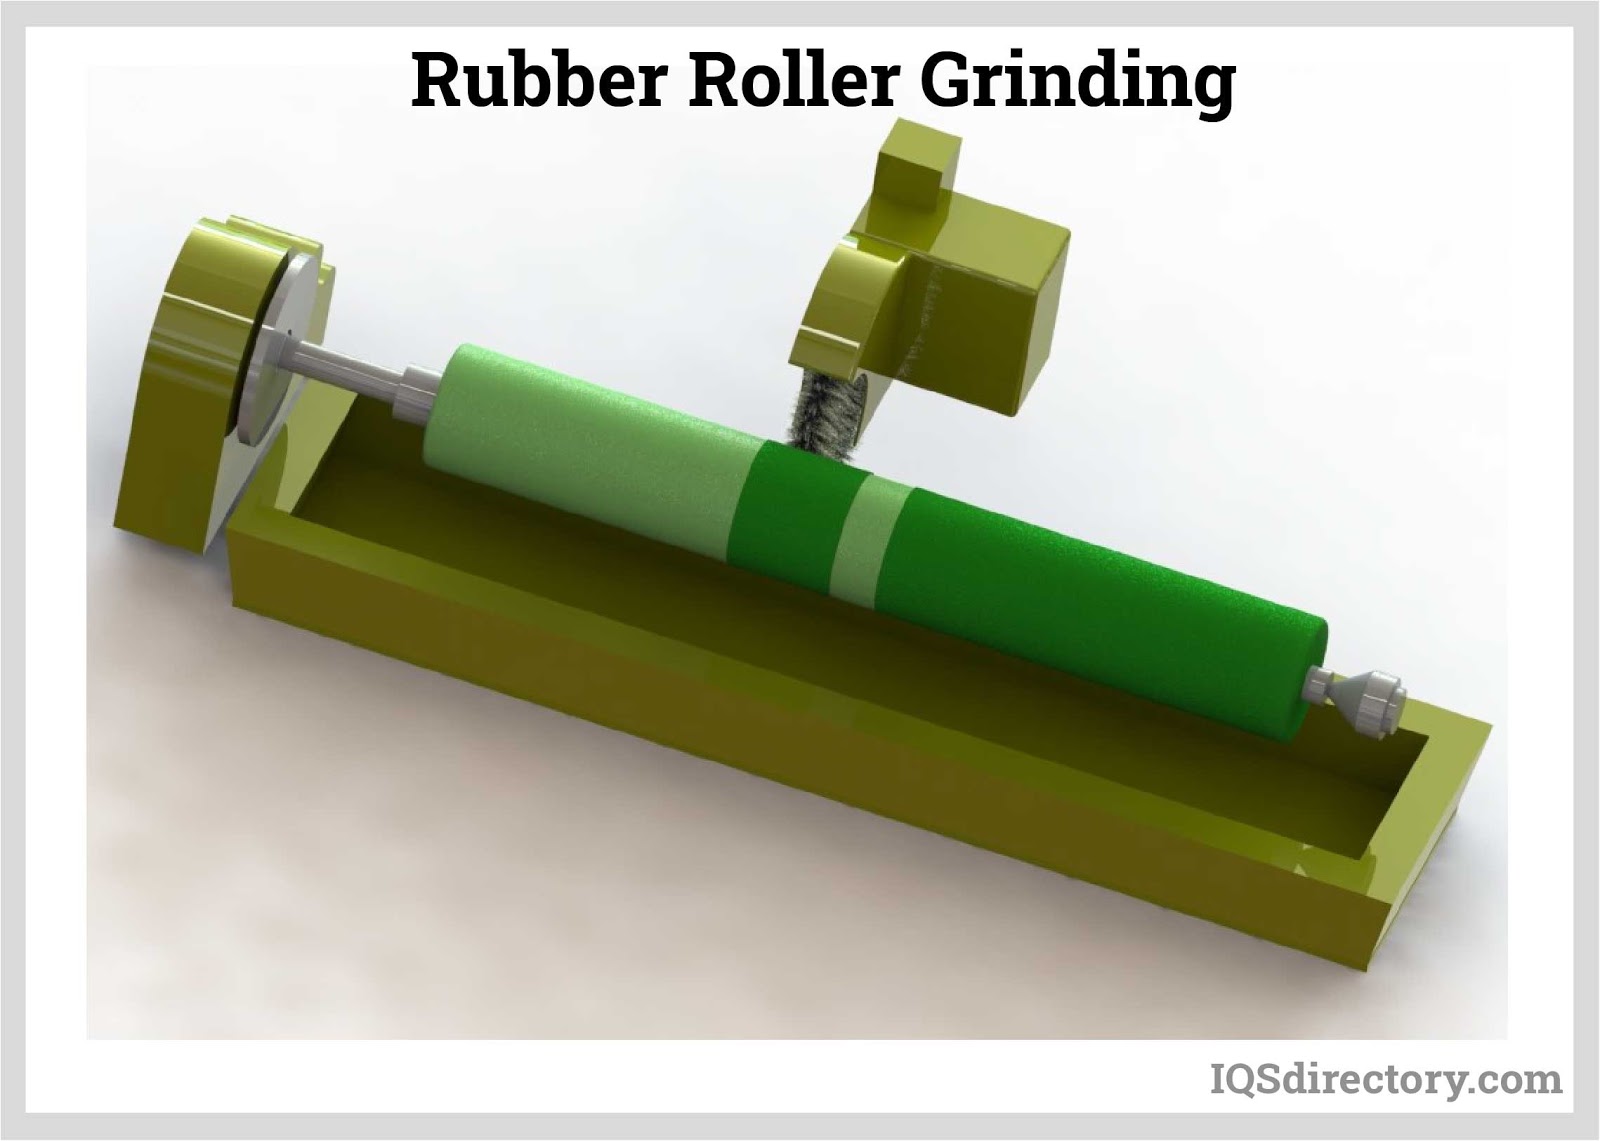 Rubber Roller: What Is It? How Is It Made? Types, Uses